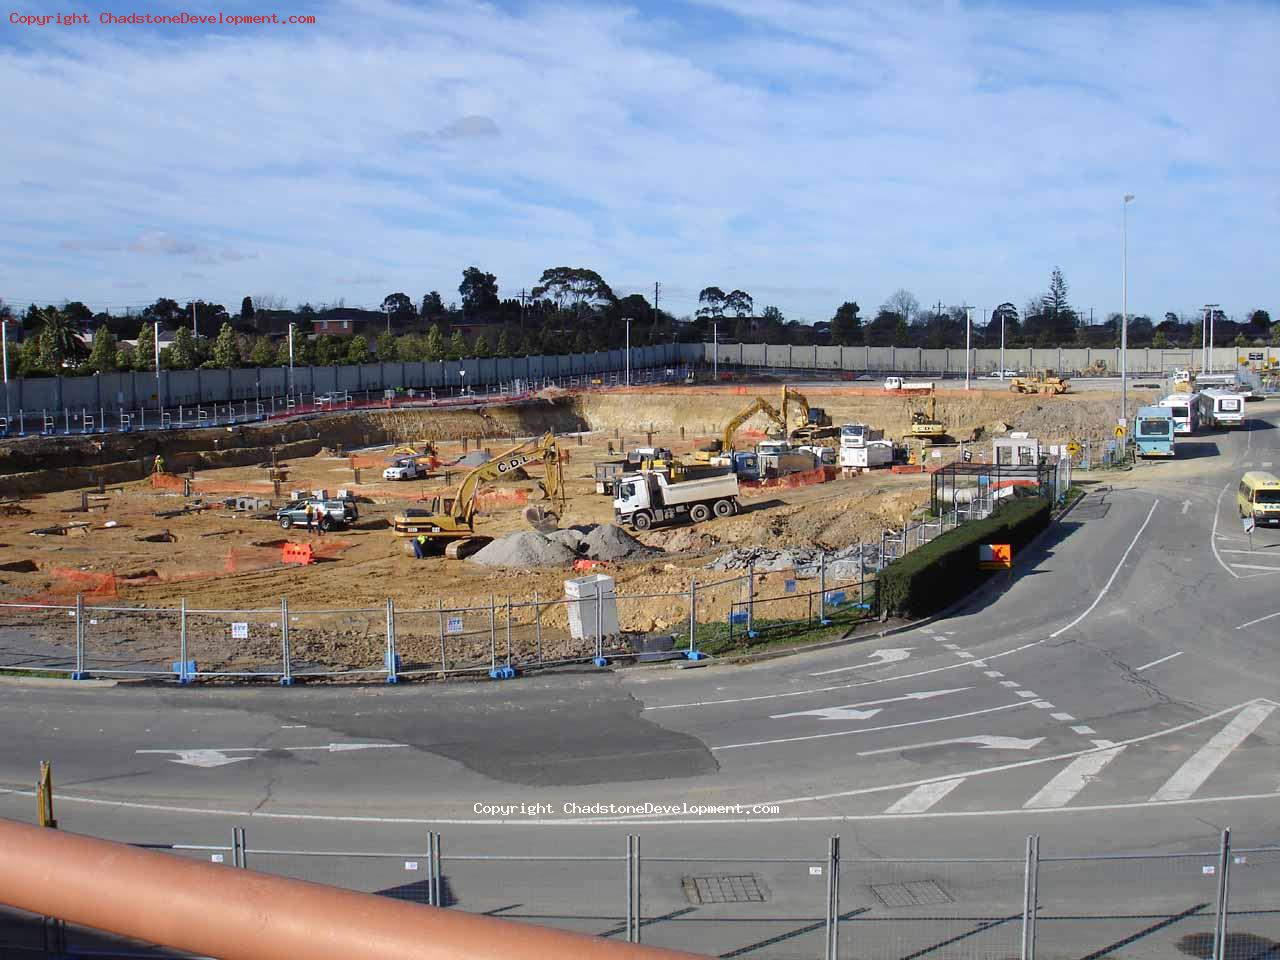 Overview of carpark construction - Chadstone Development Discussions